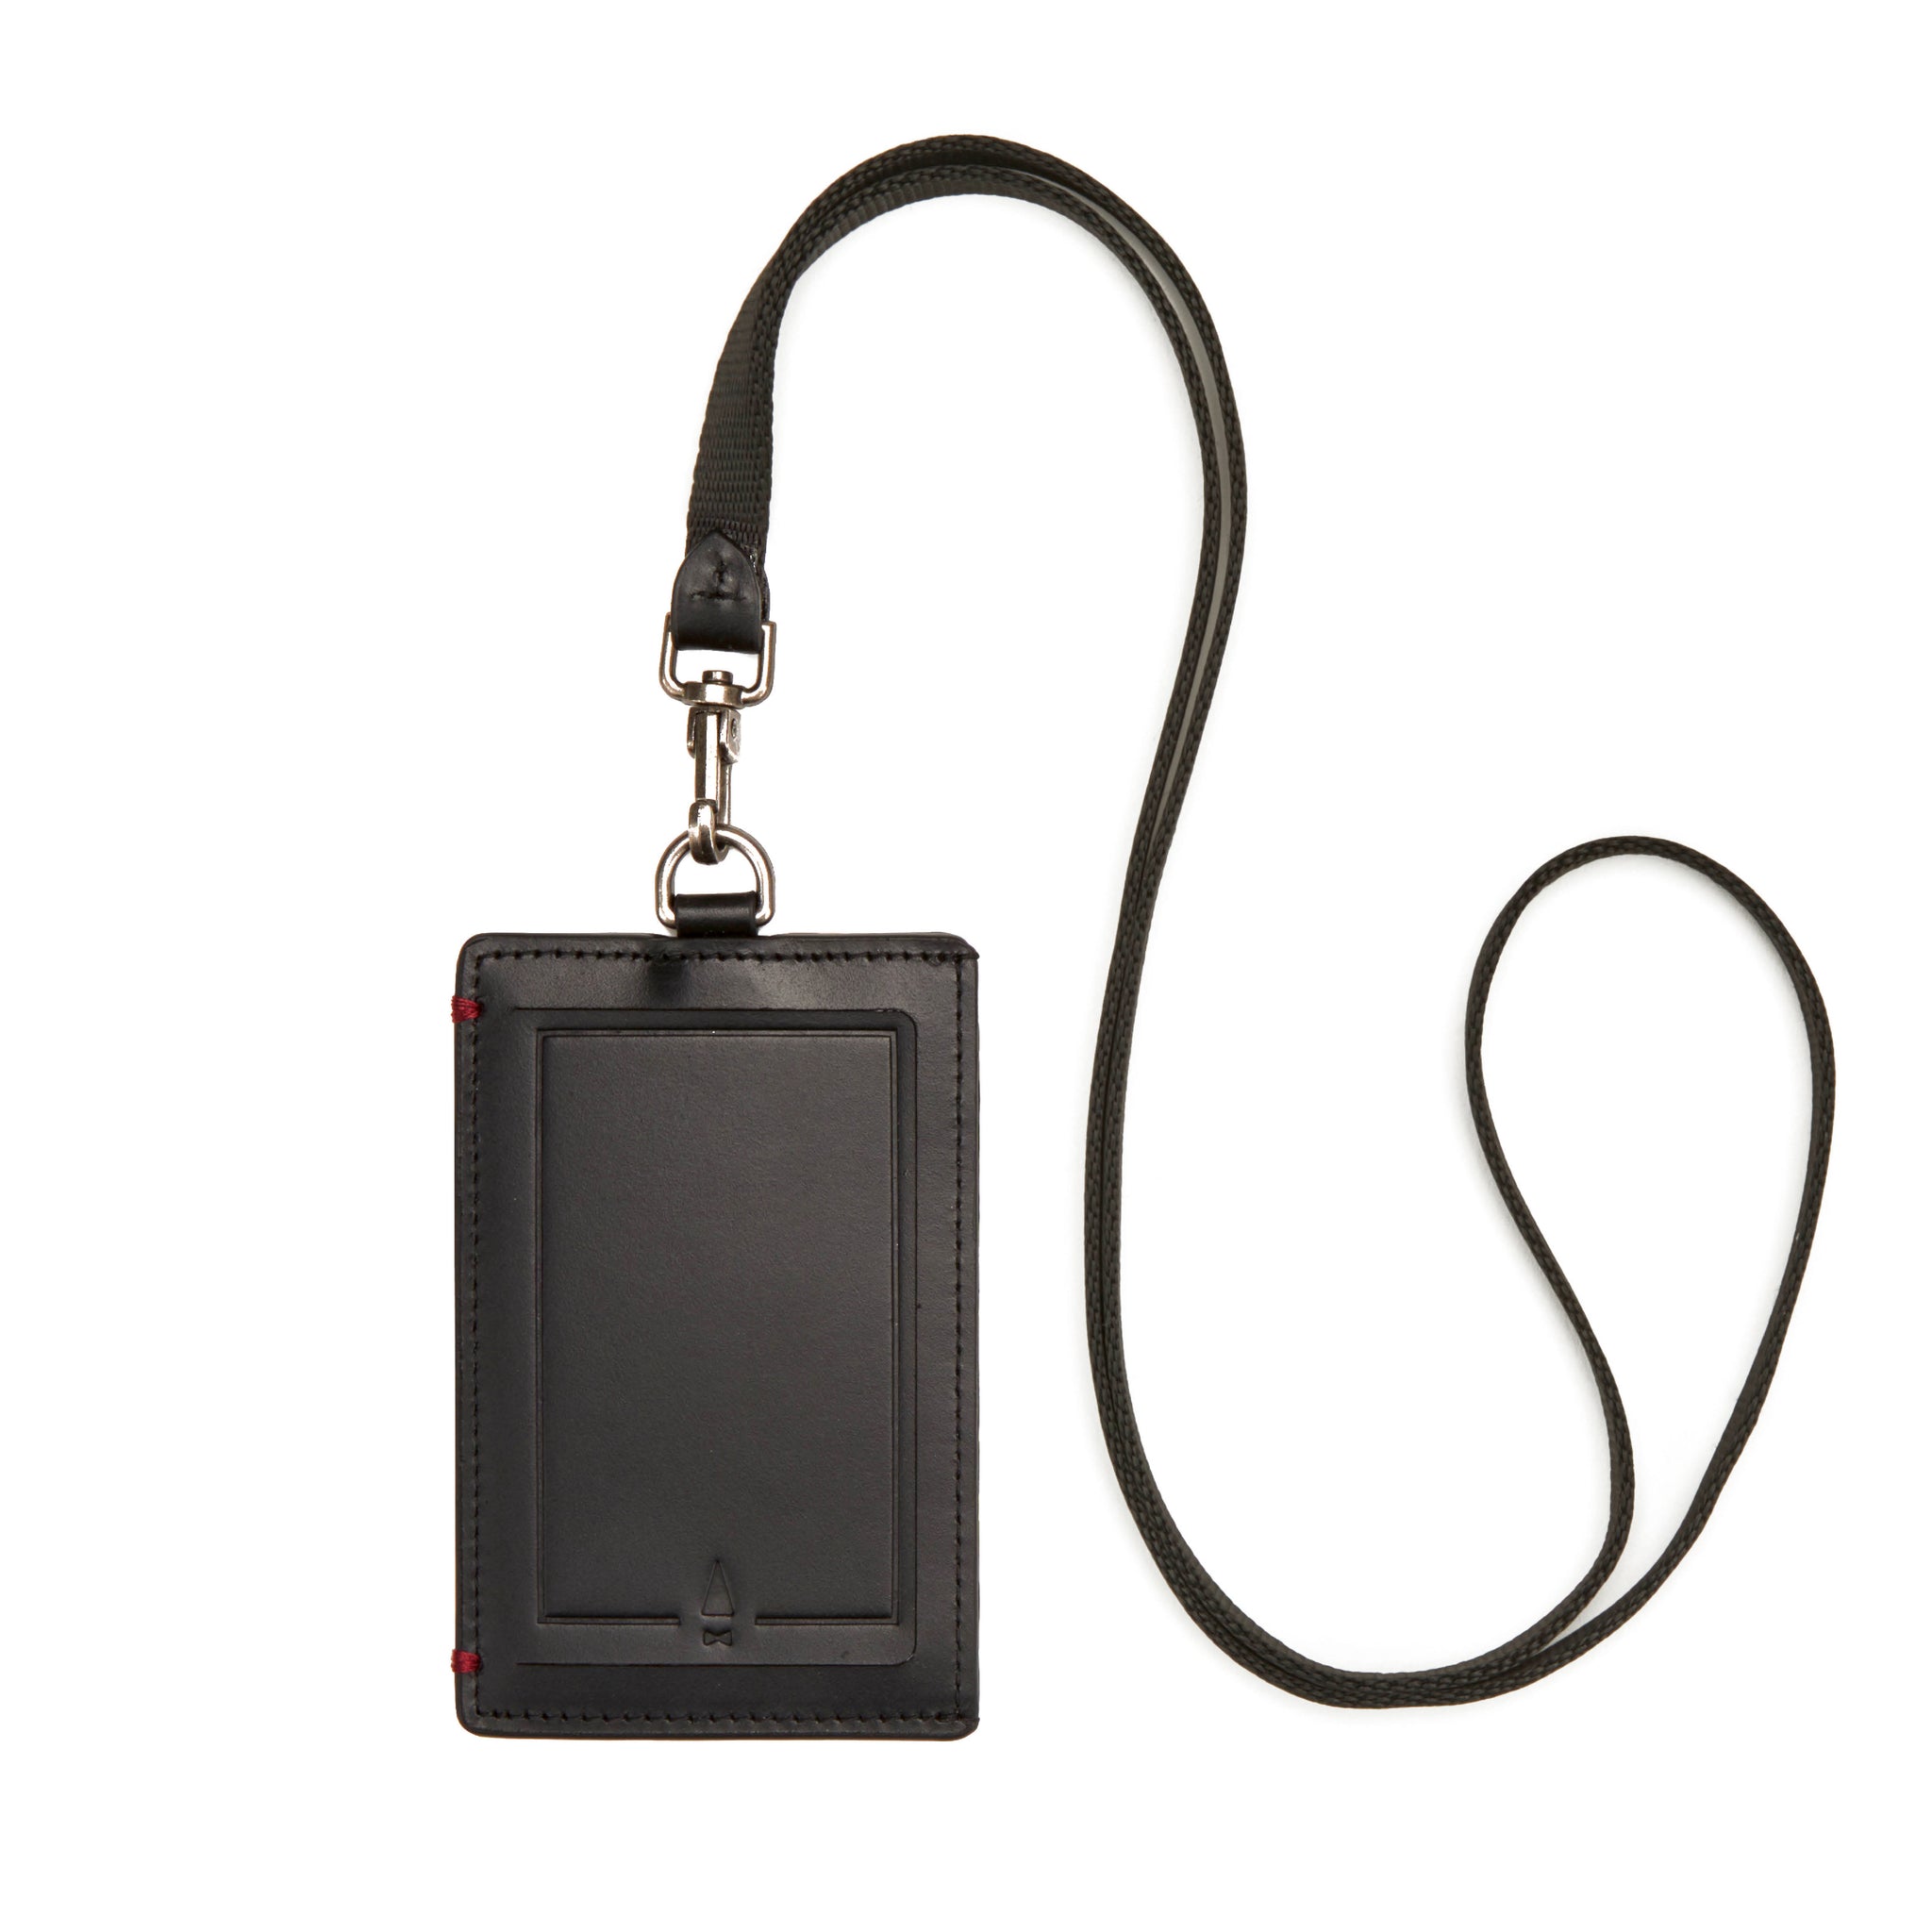 Buy Custom Leather ID Access Card Holder Lanyards Online in Singapore